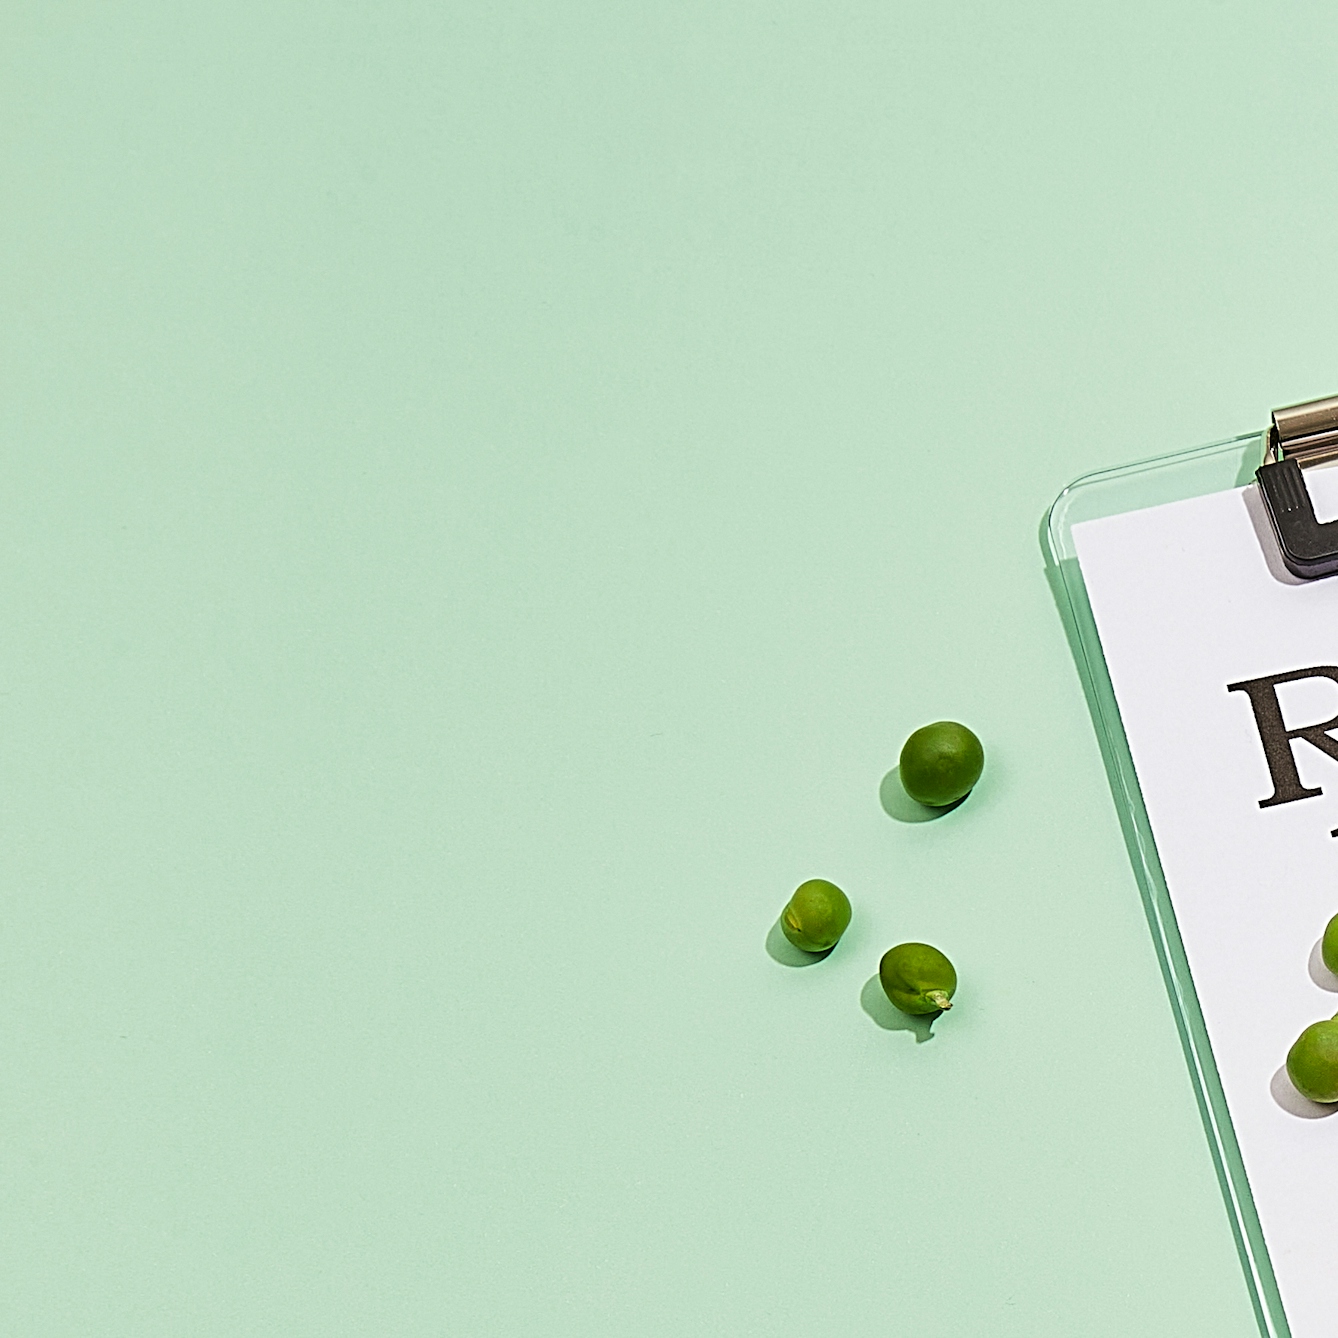 Photograph of a clipboard with a blank doctor's prescription note attached to it, resting on a light green background. Loose on the background, to the left of the clipboard are a scattering of loose green peas.